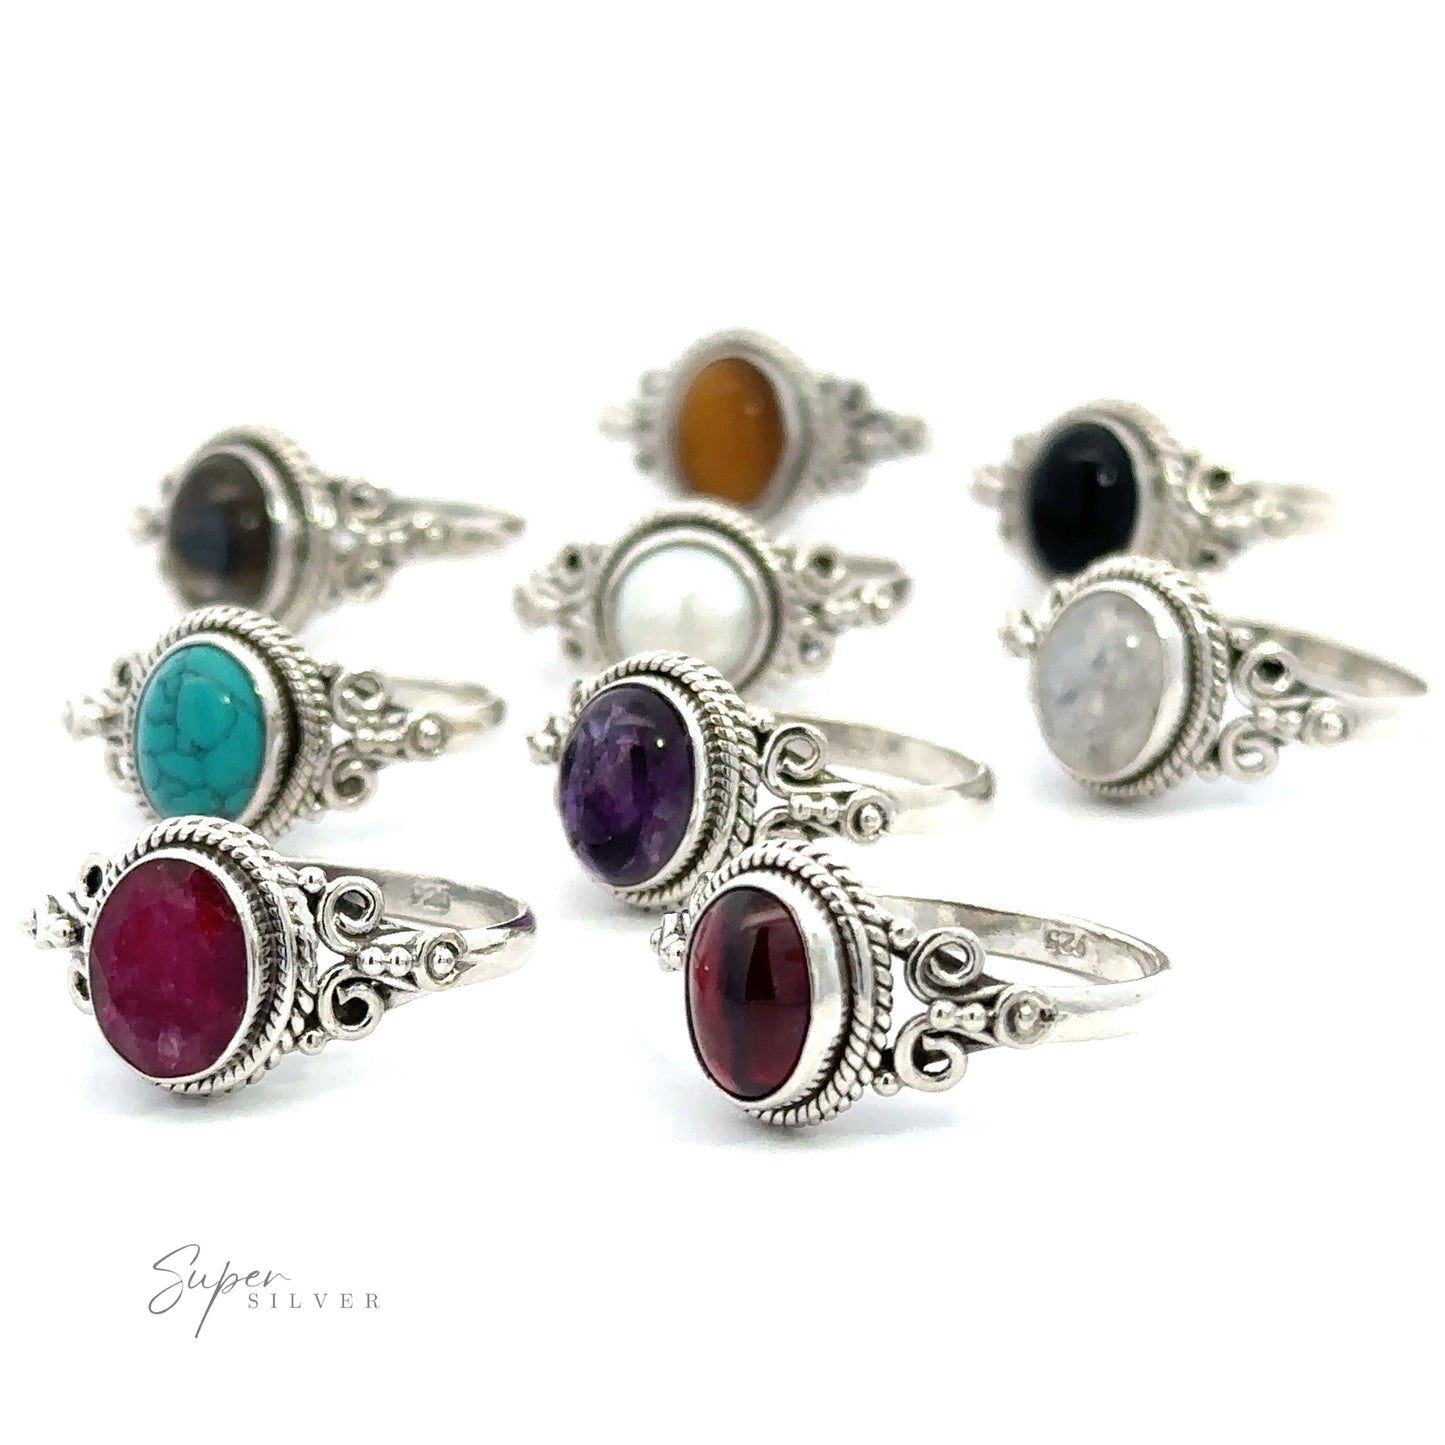 A collection of silver rings with various colored Natural Oval Gemstone Rings with Intricate Rope and Long Spiral Border on a white background.